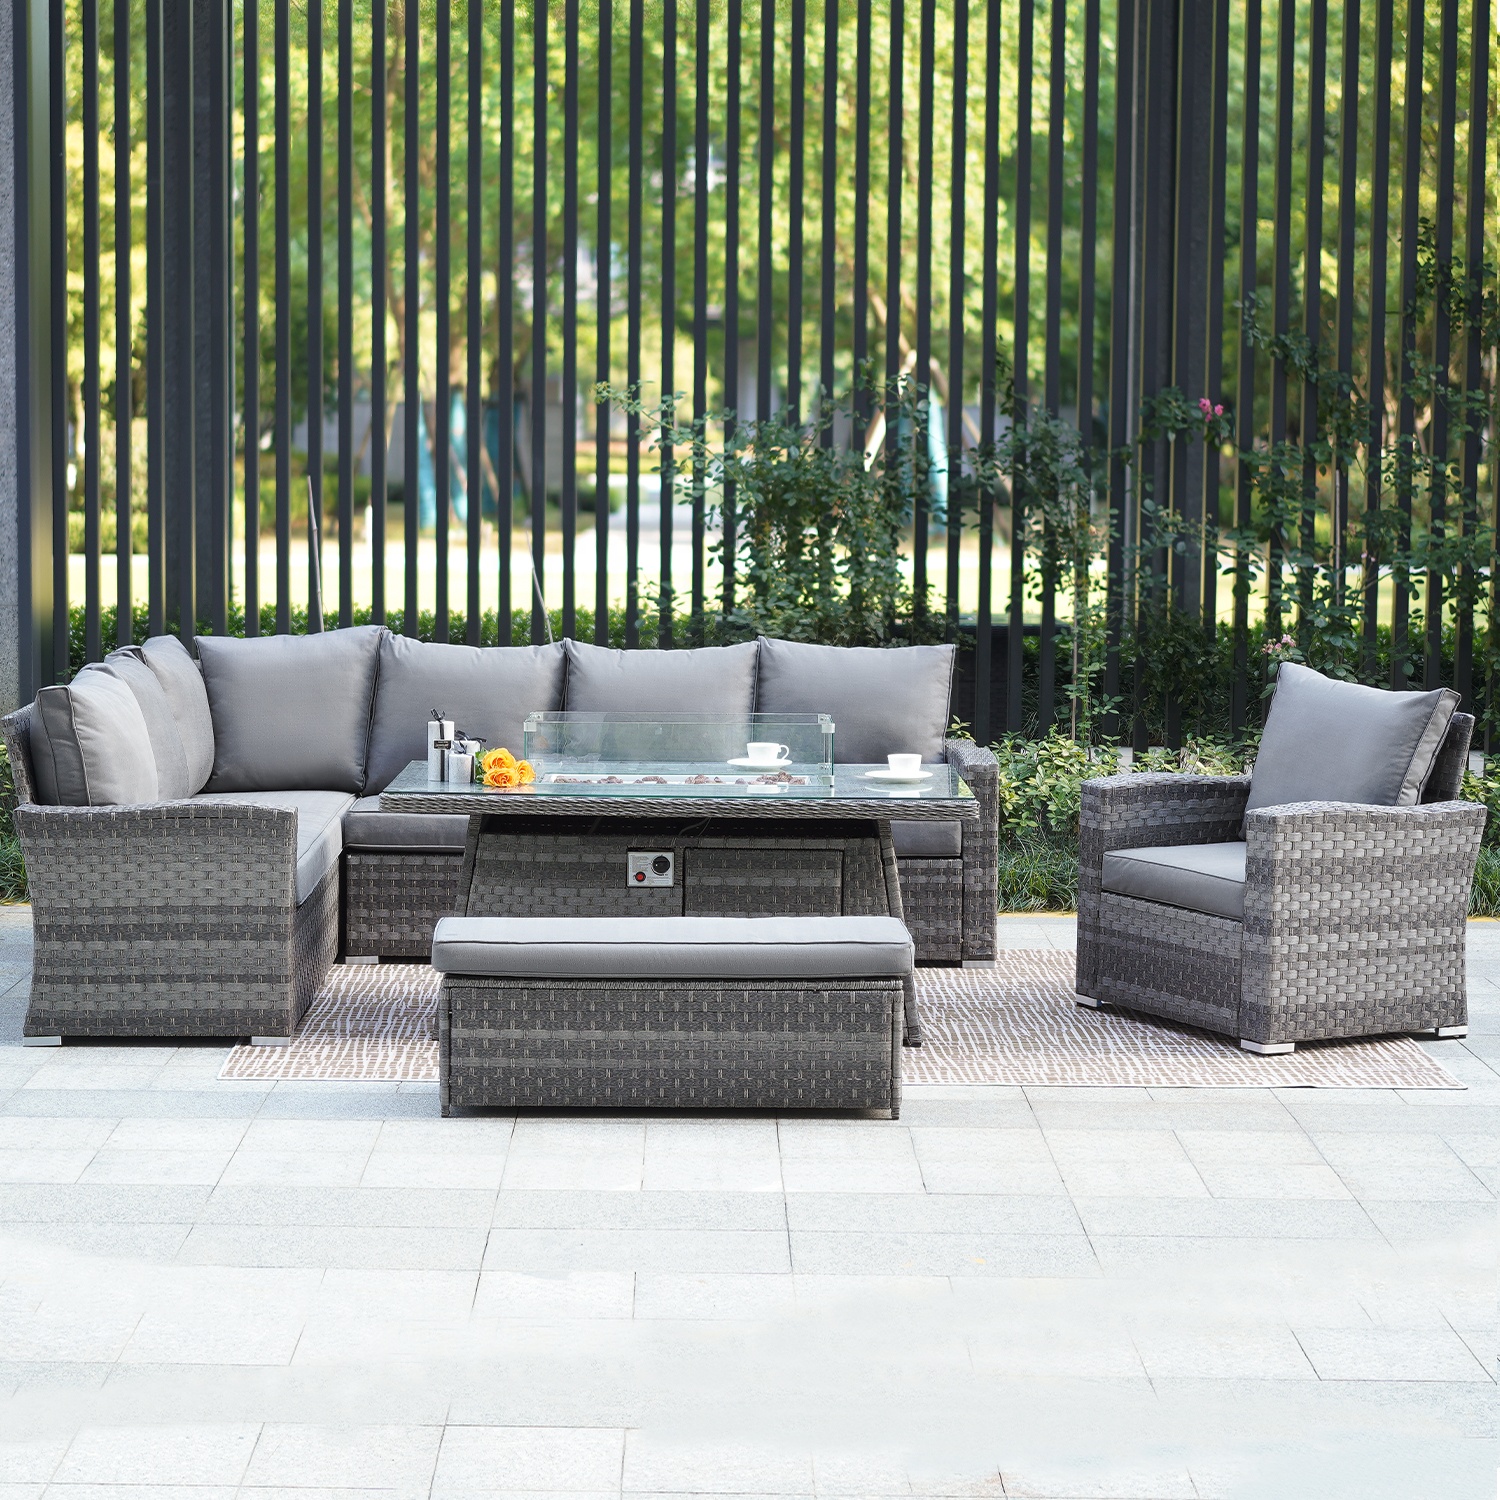 Modern Design & Durability: Sleek edges combined with full-round all-weather resin wicker give this long-lasting set a contemporary and elegant look. .